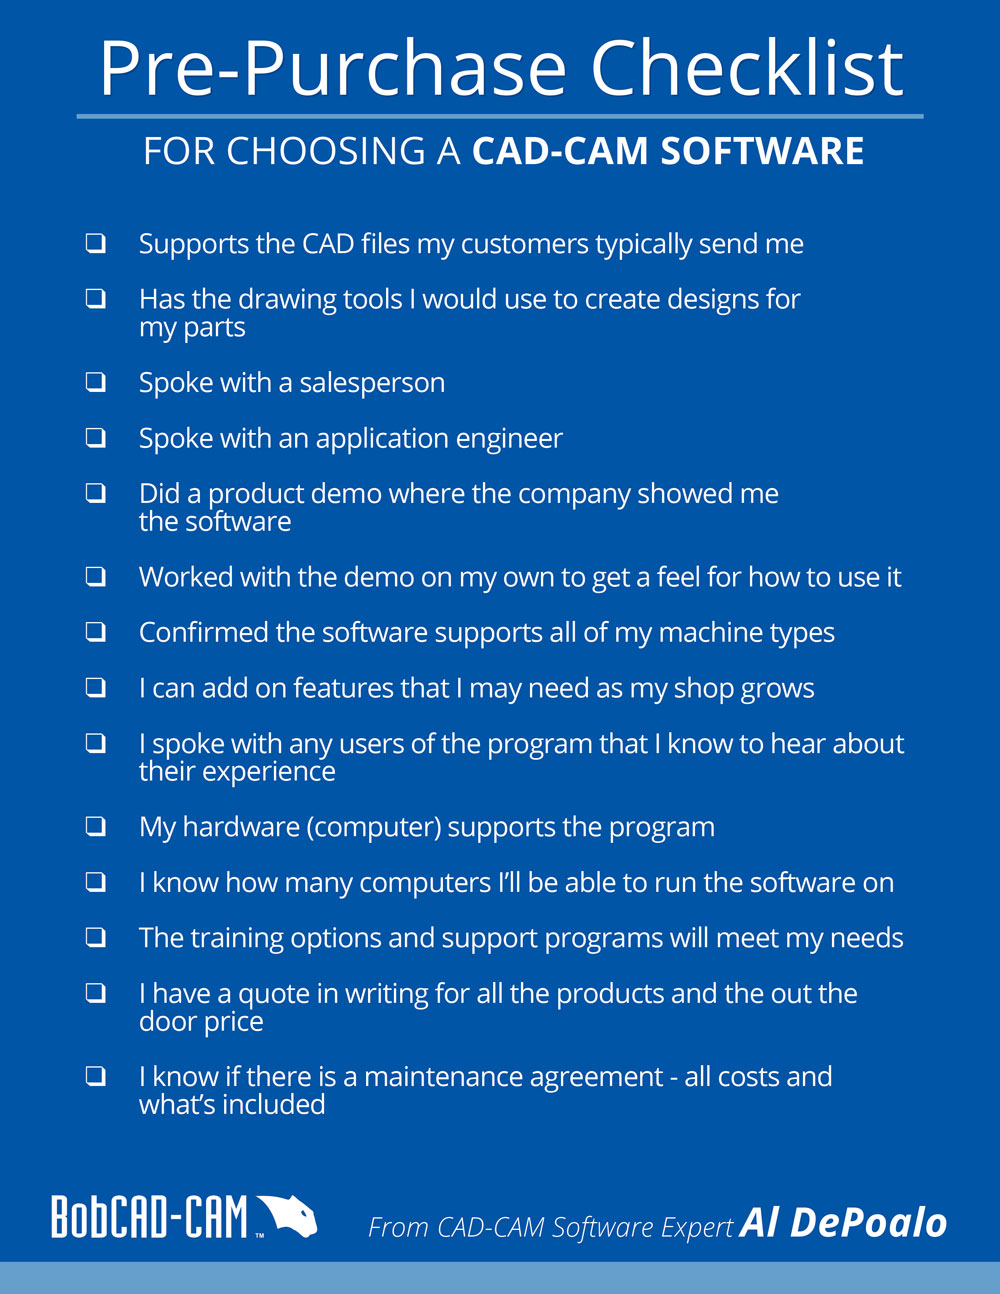 Pre-Purchase Checklist for Choosing a CAD-CAM Software